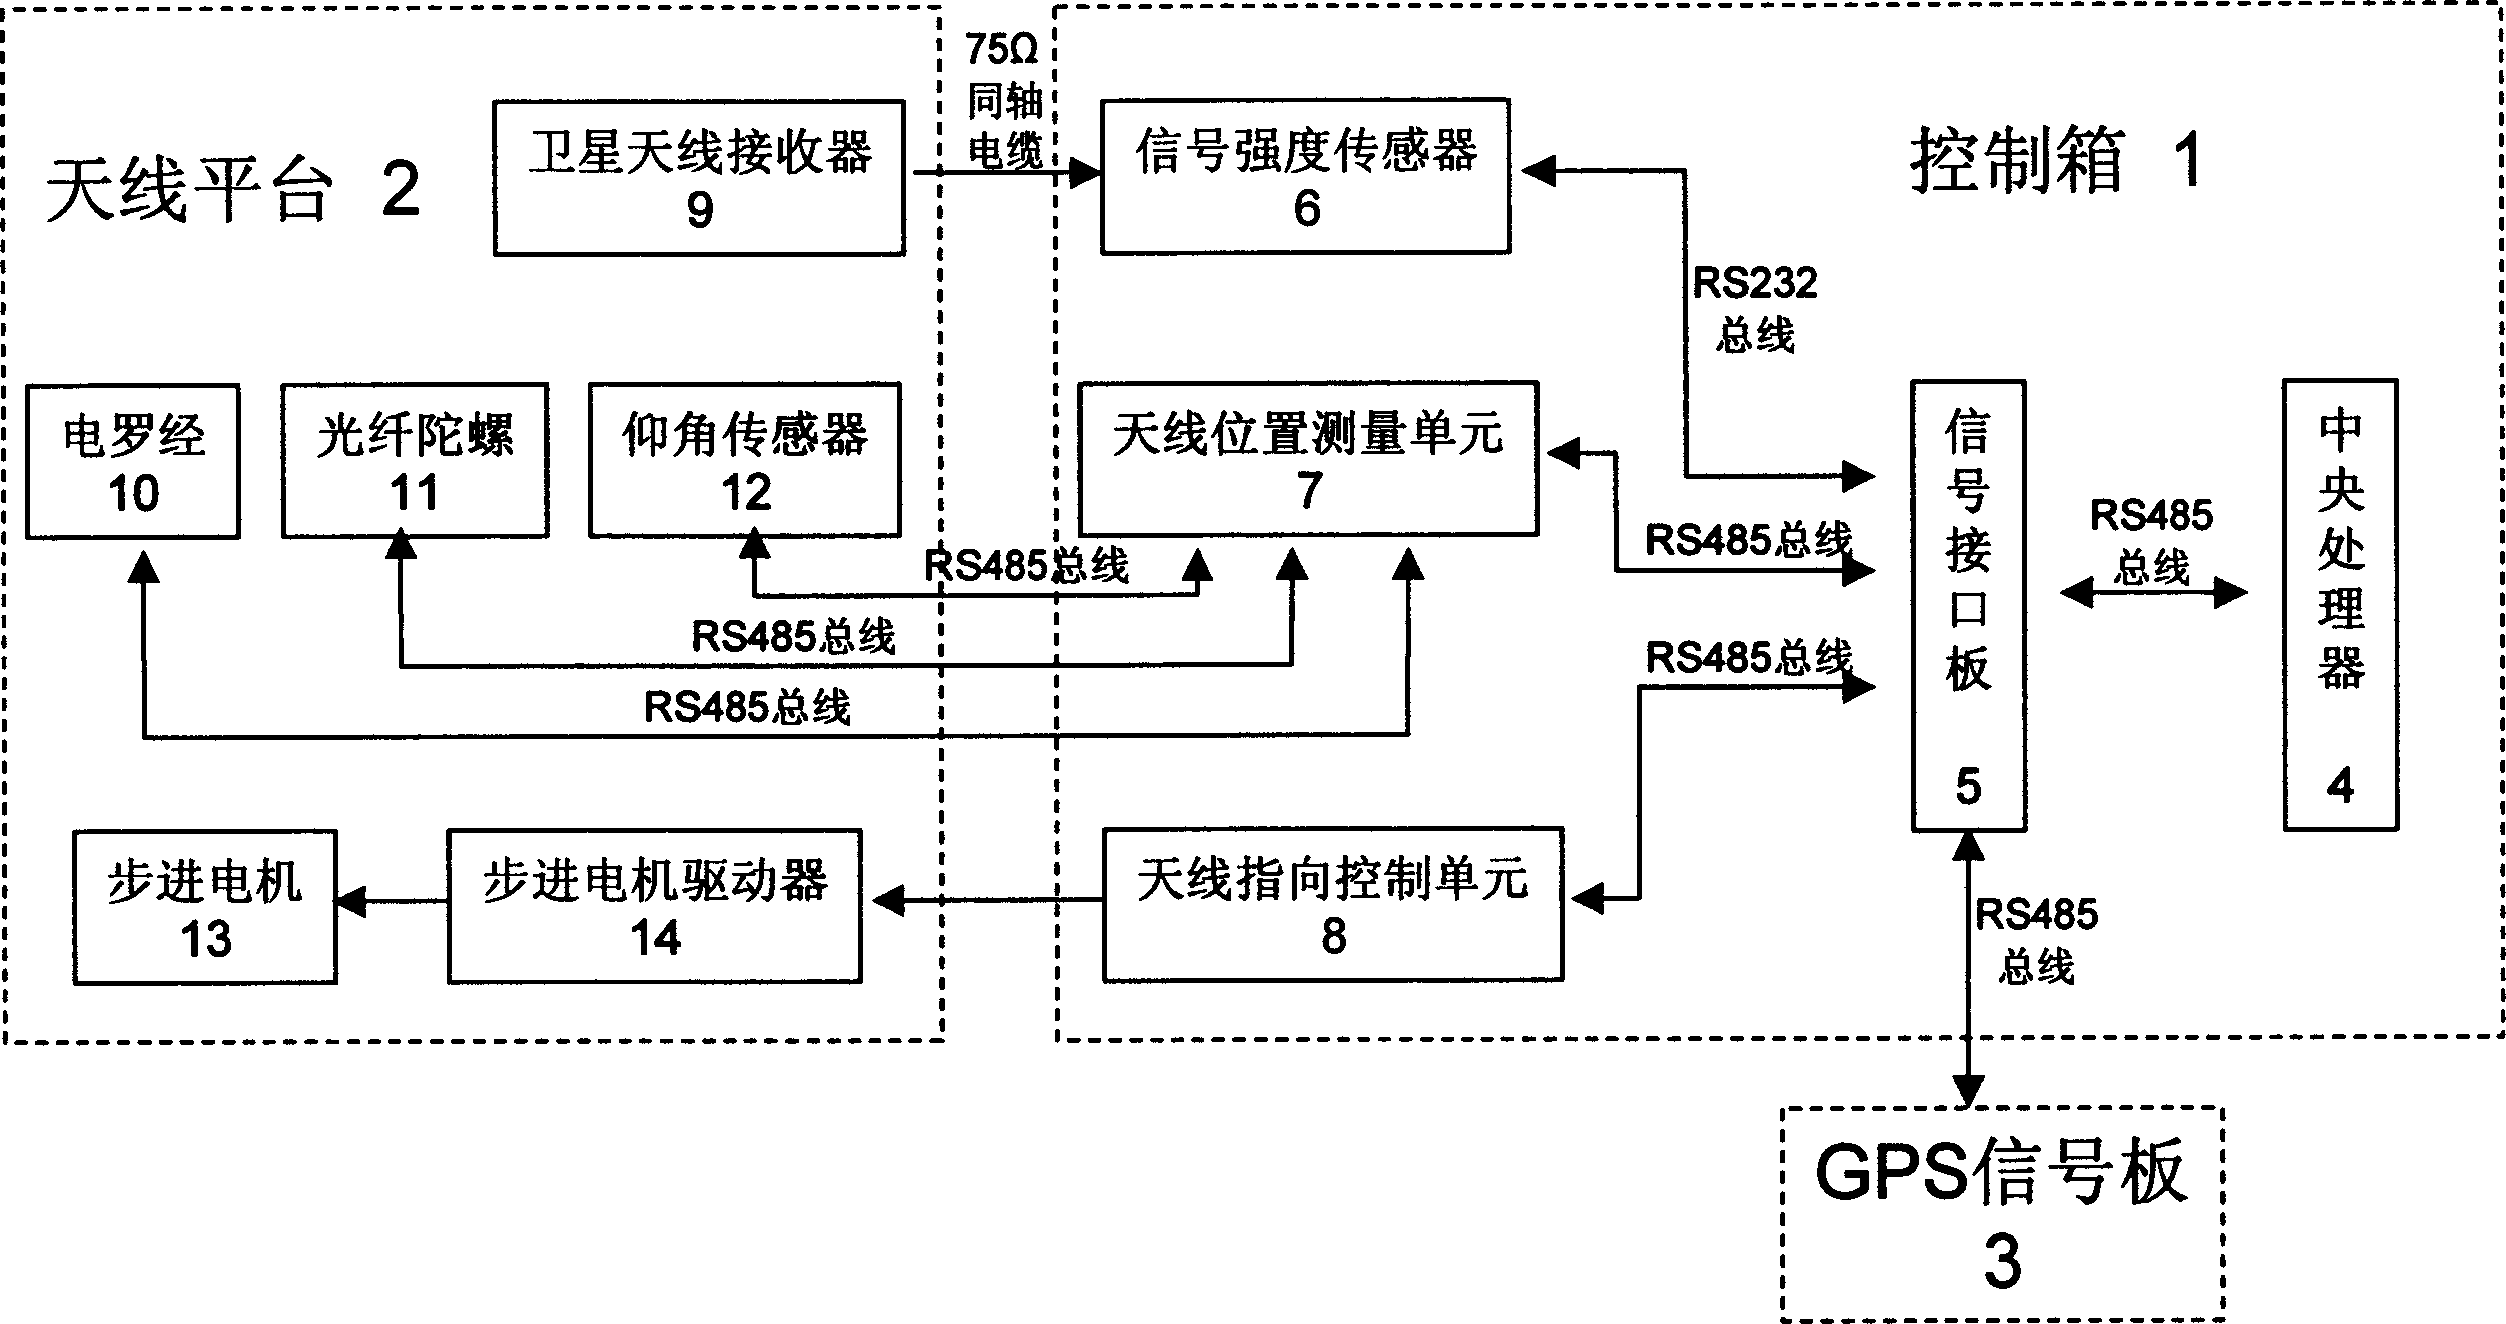 Mobile satellite automatic tracing control device